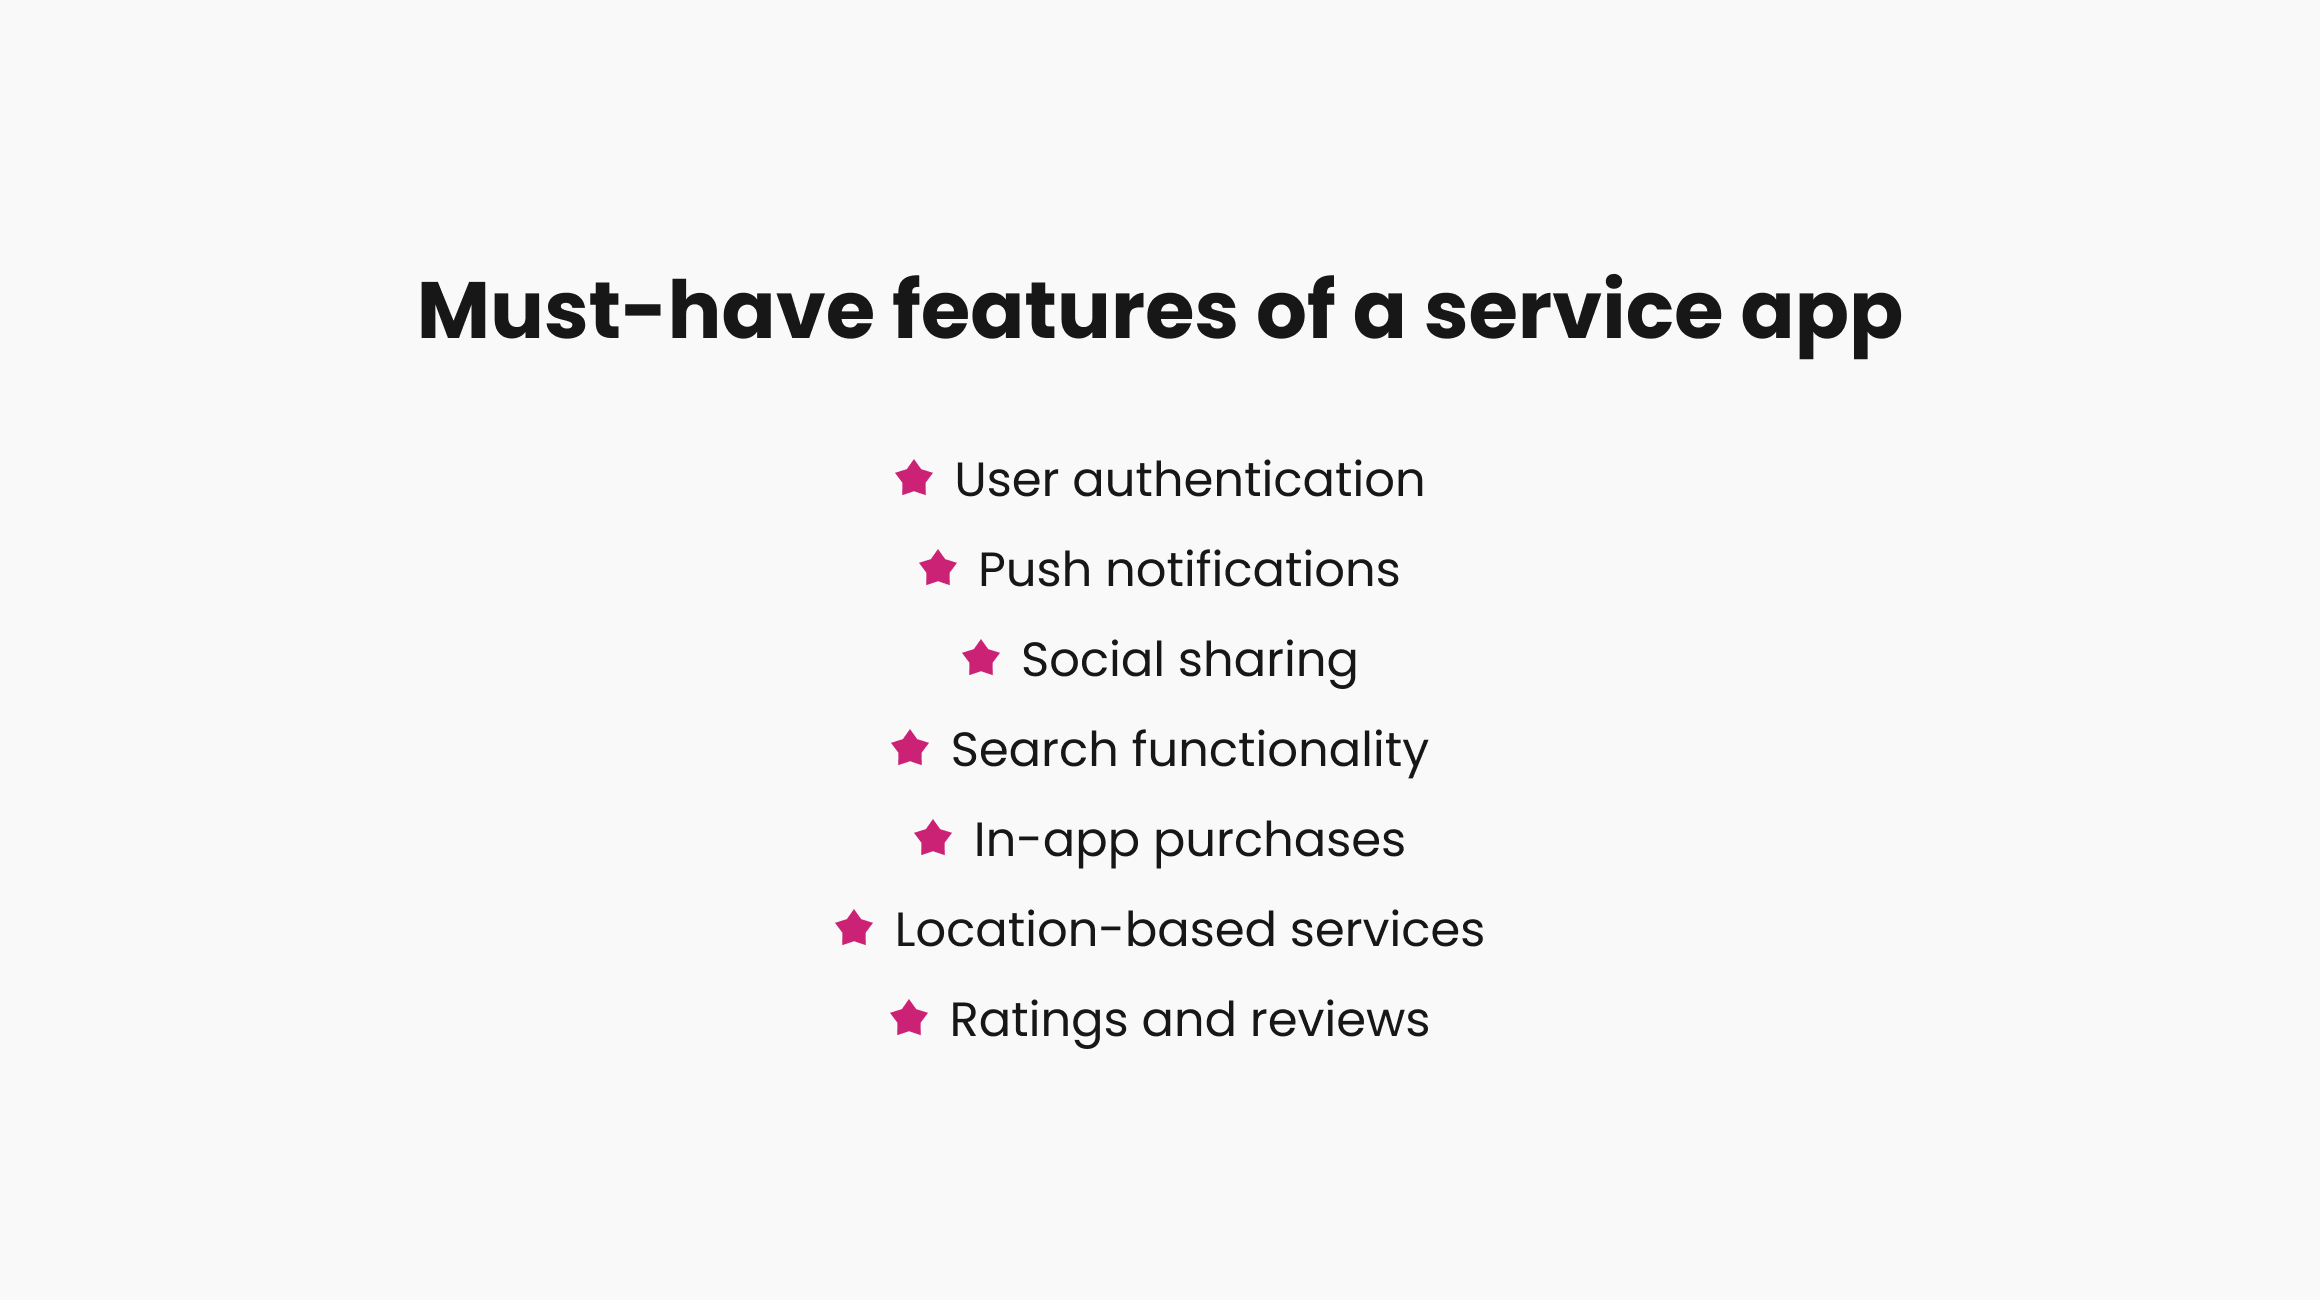 Features and Functionality of a service app